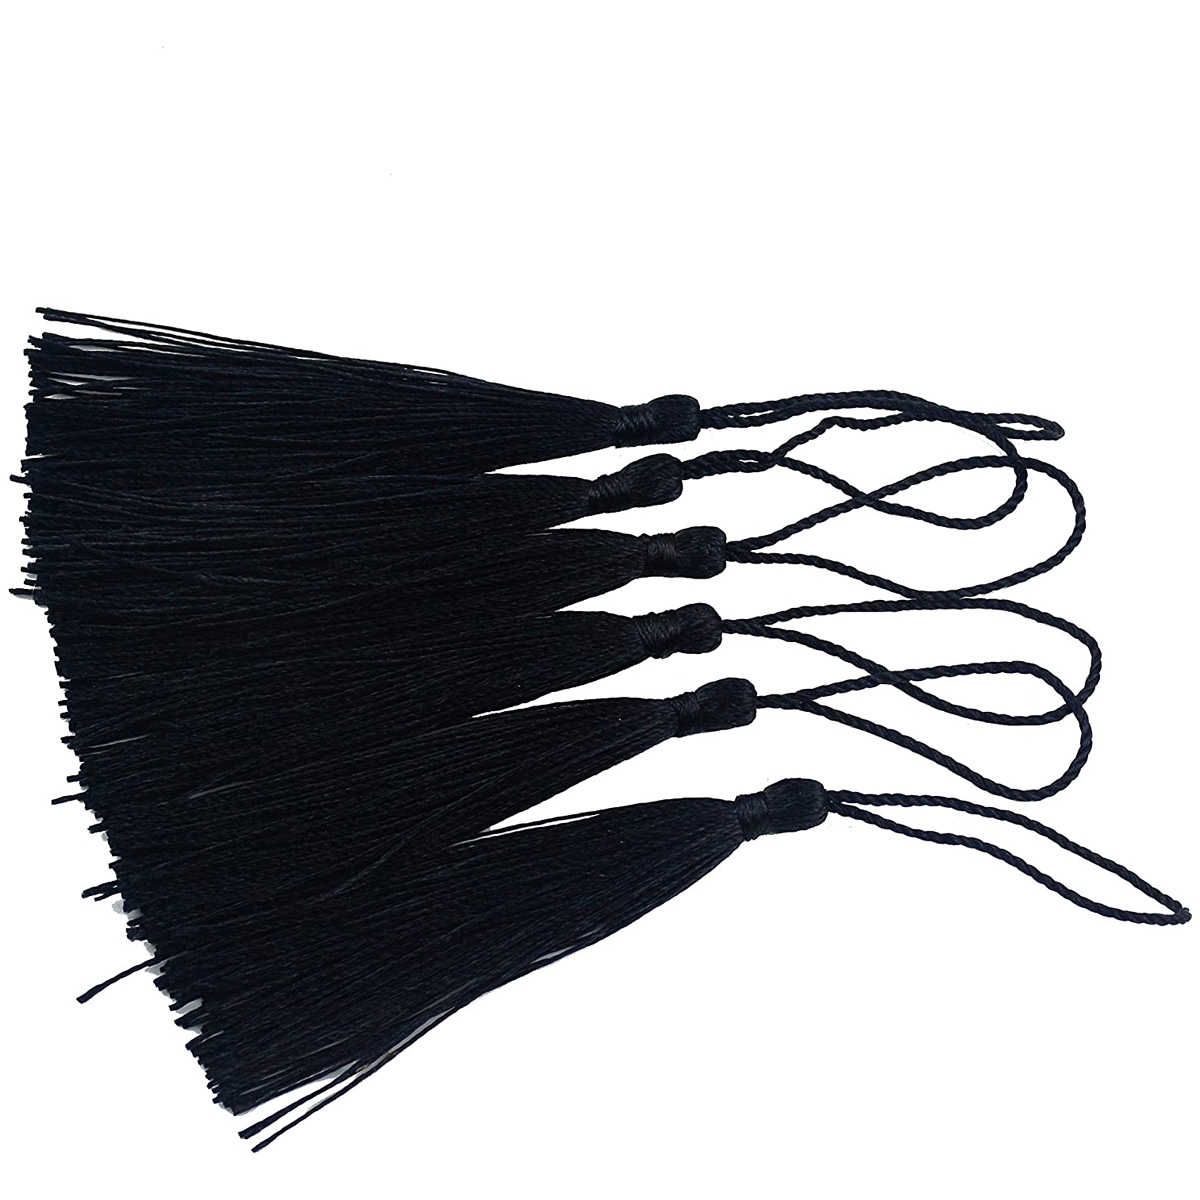 5 Inches Handmade Tassel,Bookmarks,Souvenir(Black) Tassels with Loops for DIY, Jewelry Making